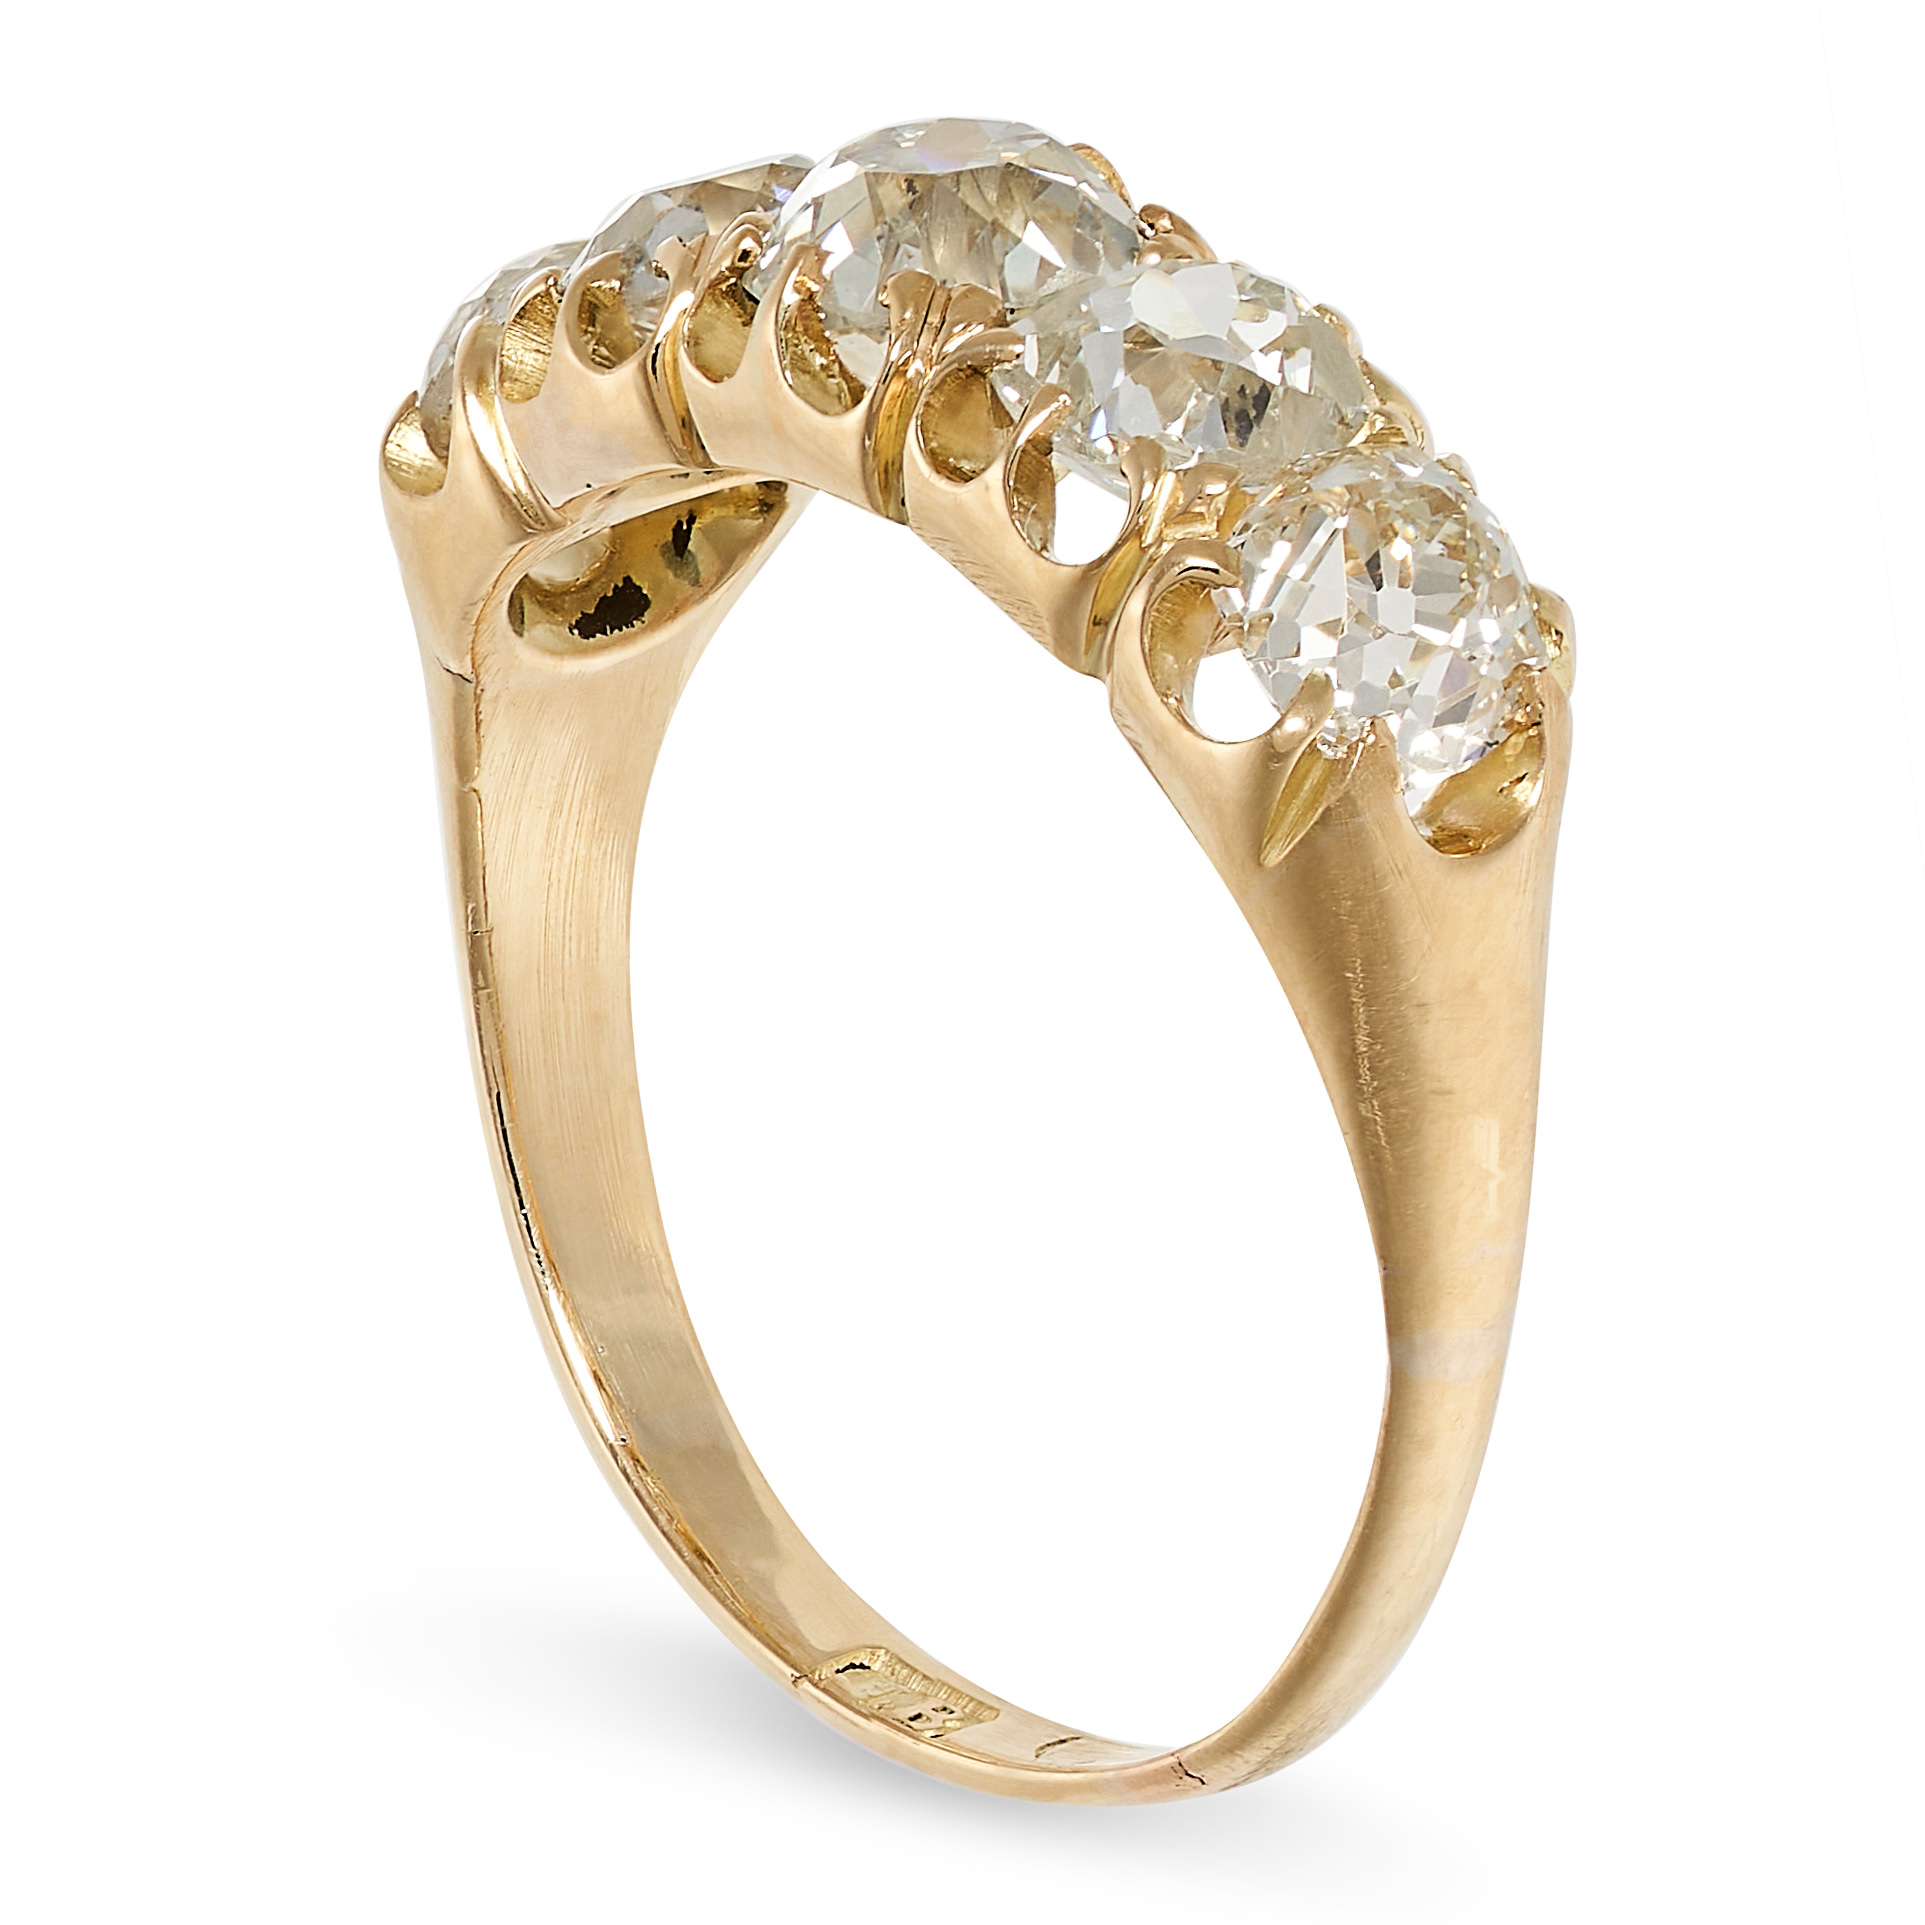 AN ANTIQUE DIAMOND FIVE STONE RING in yellow gold, set with a graduated row of old cut diamonds - Image 2 of 2